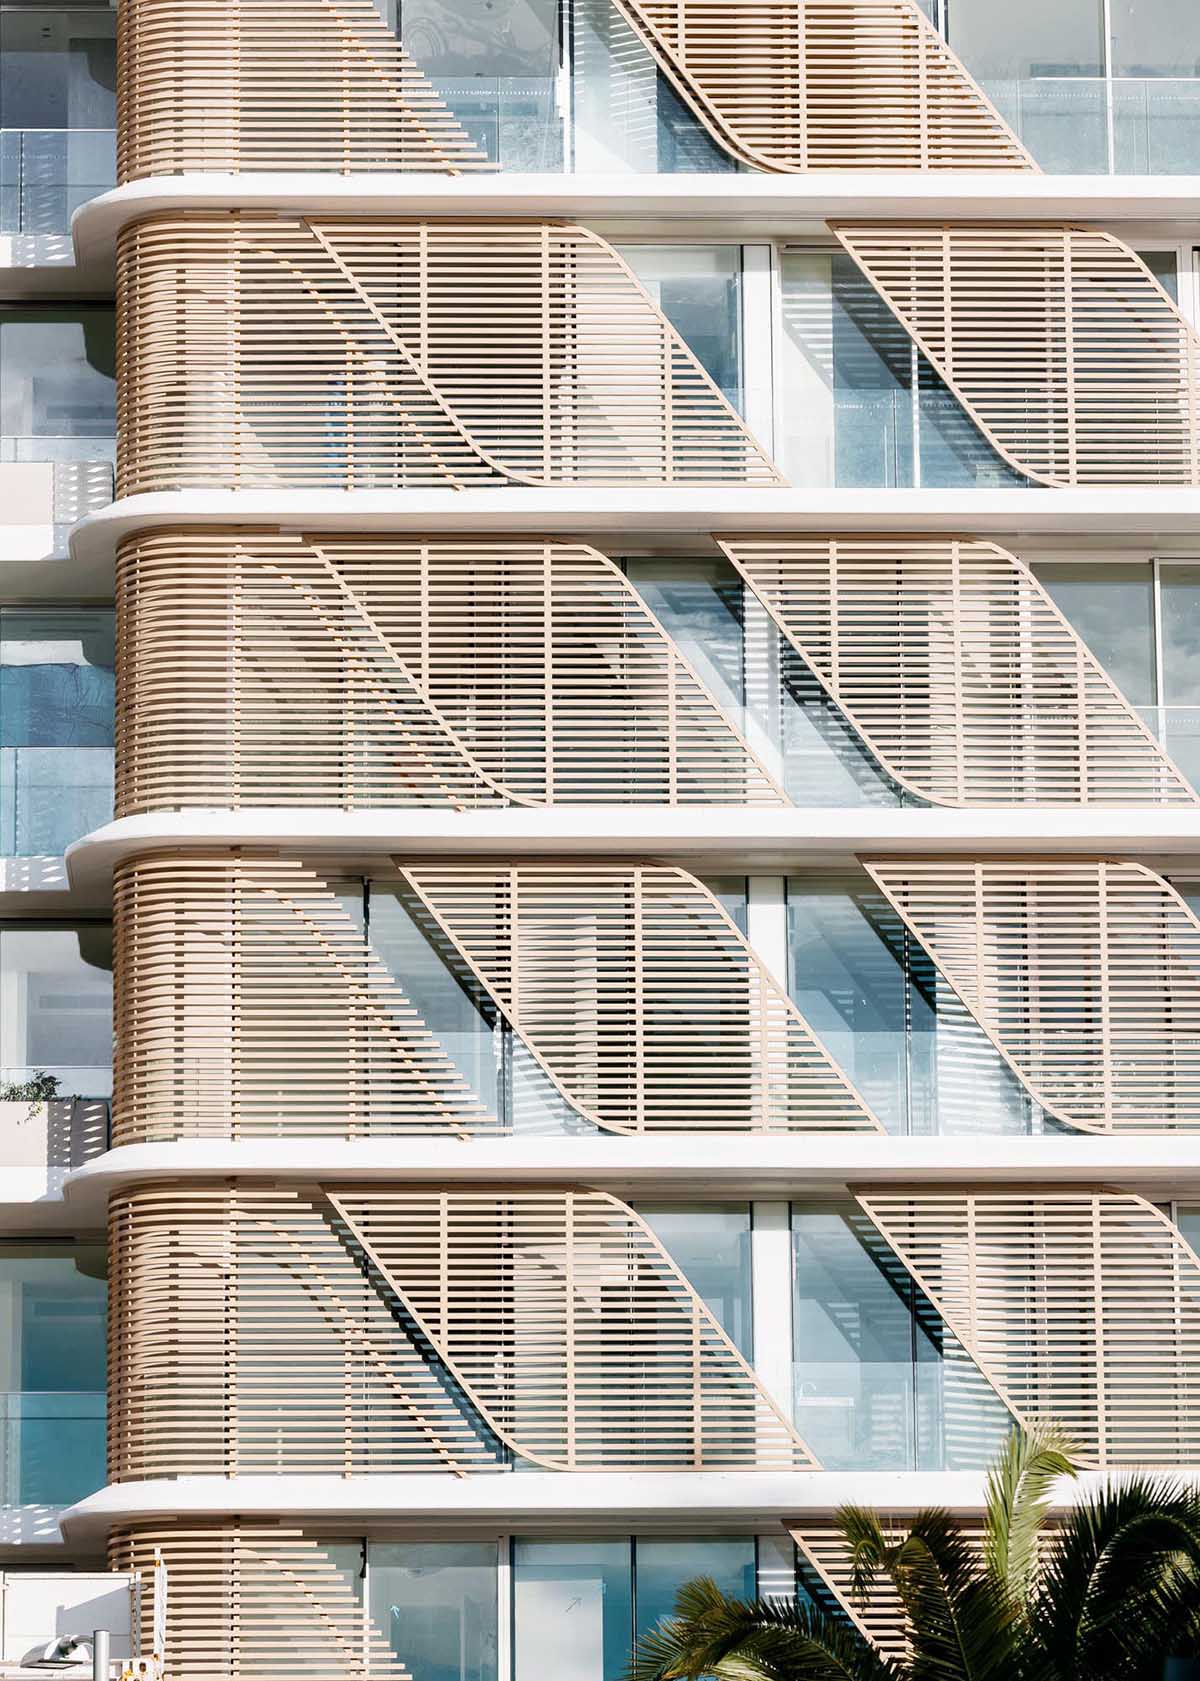 A modern and sculptural building with sliding wood slat screens on the exterior.